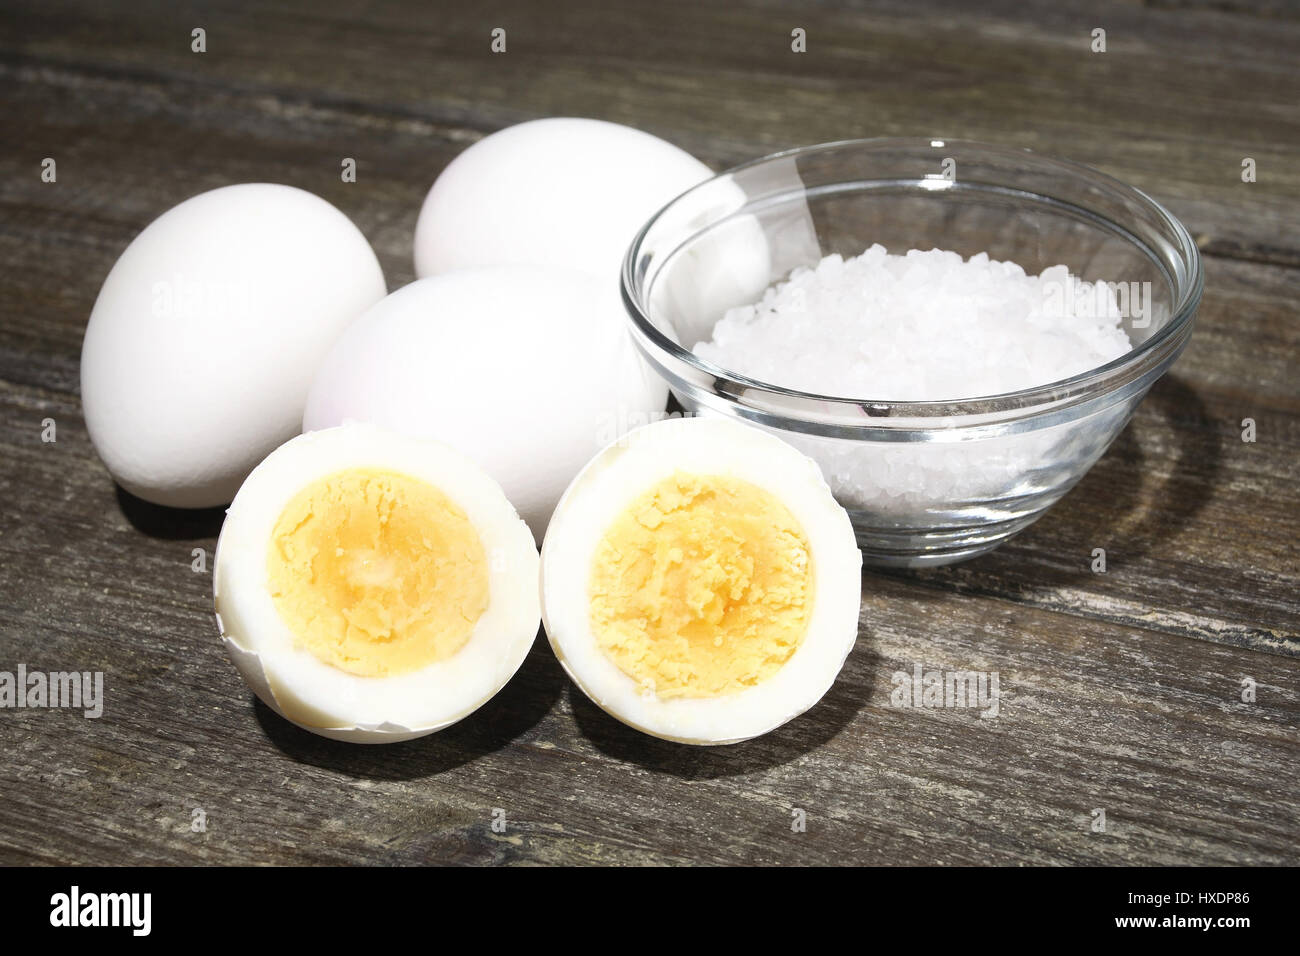 Cooked eggs and salt, Boiled eggs and salt |, Gekochte Eier und Salz |Boiled eggs and salt| Stock Photo